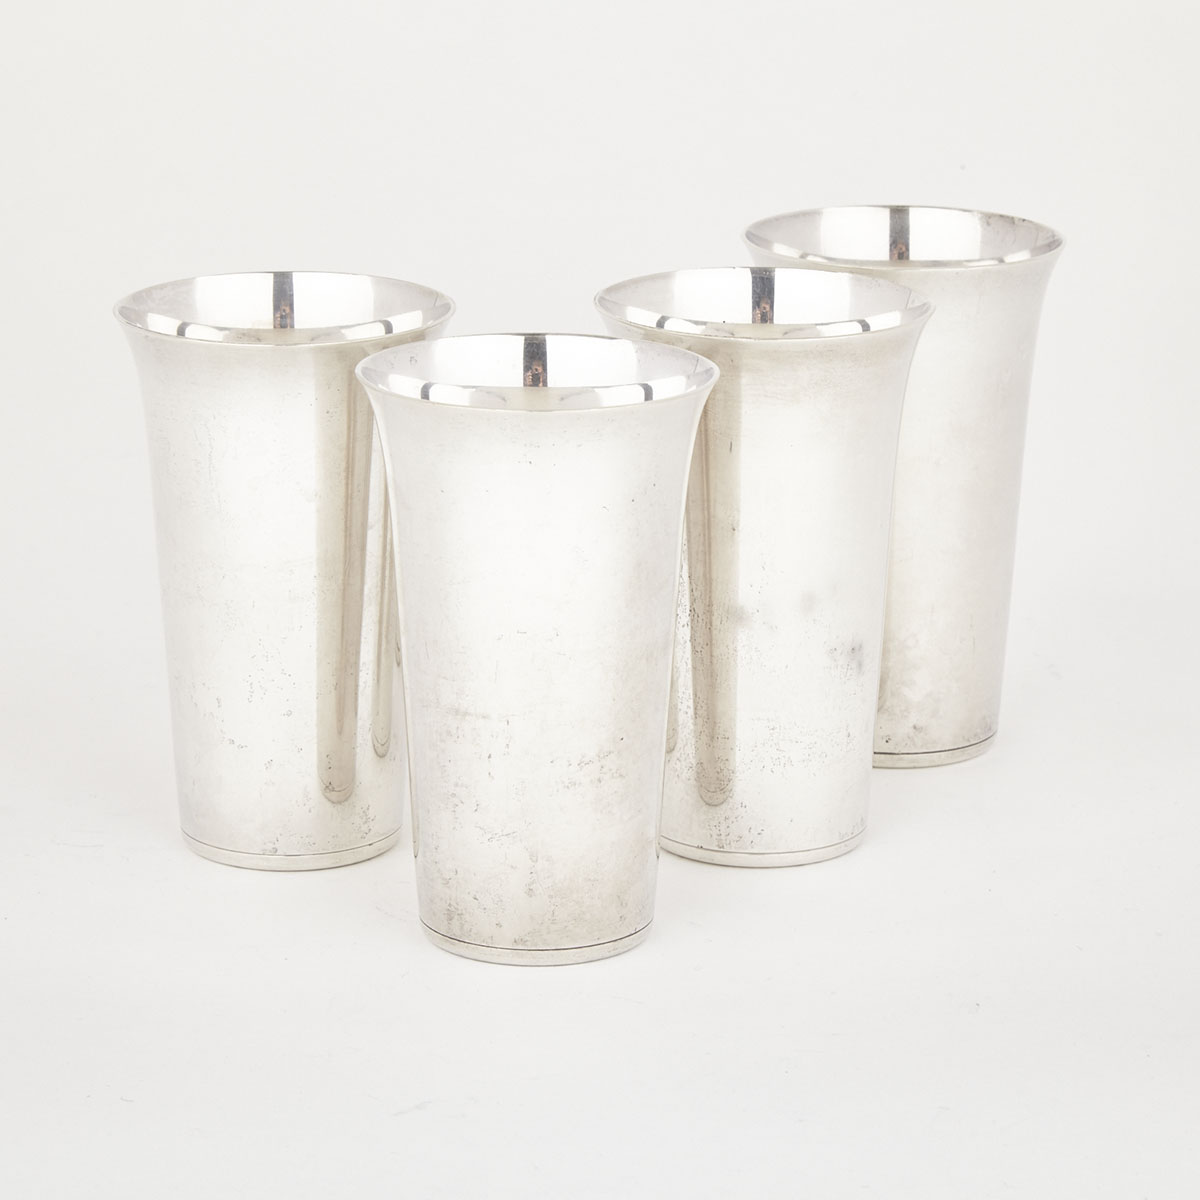 Four American Silver Mint Julep Cups, Randahl Shop, Chicago, Ill., mid-20th century